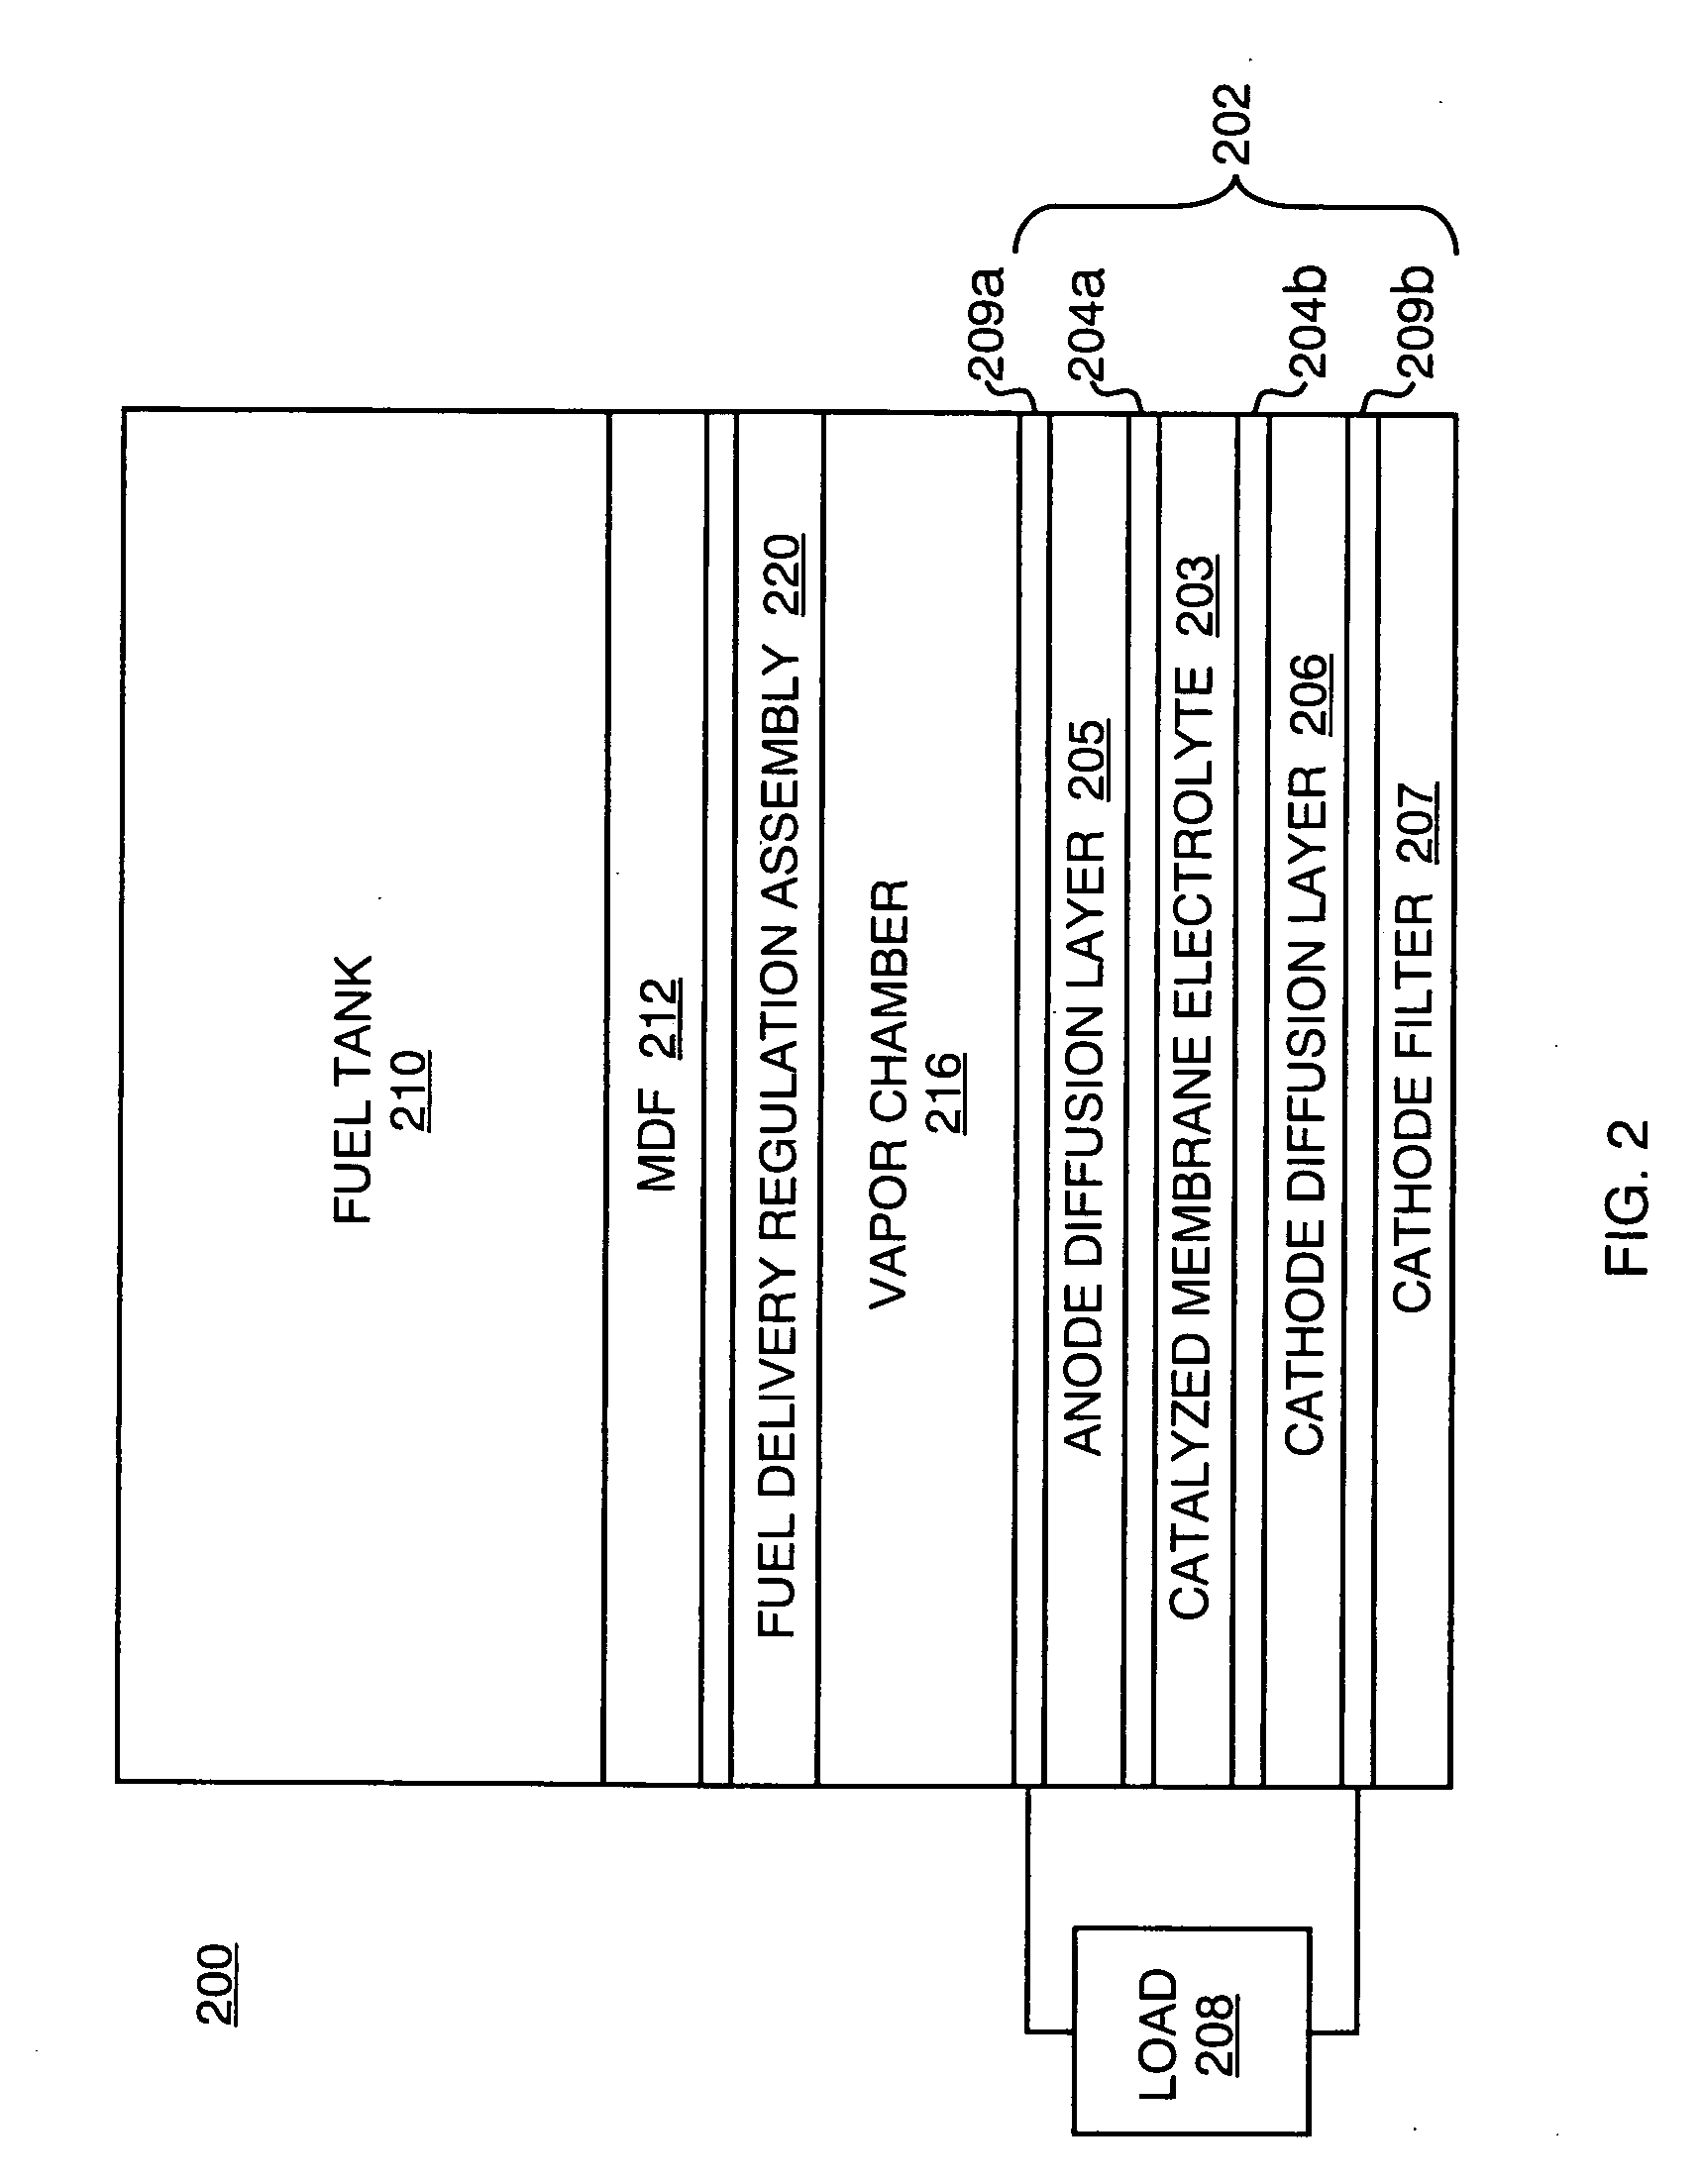 Vapor feed fuel cell system with controllable fuel delivery